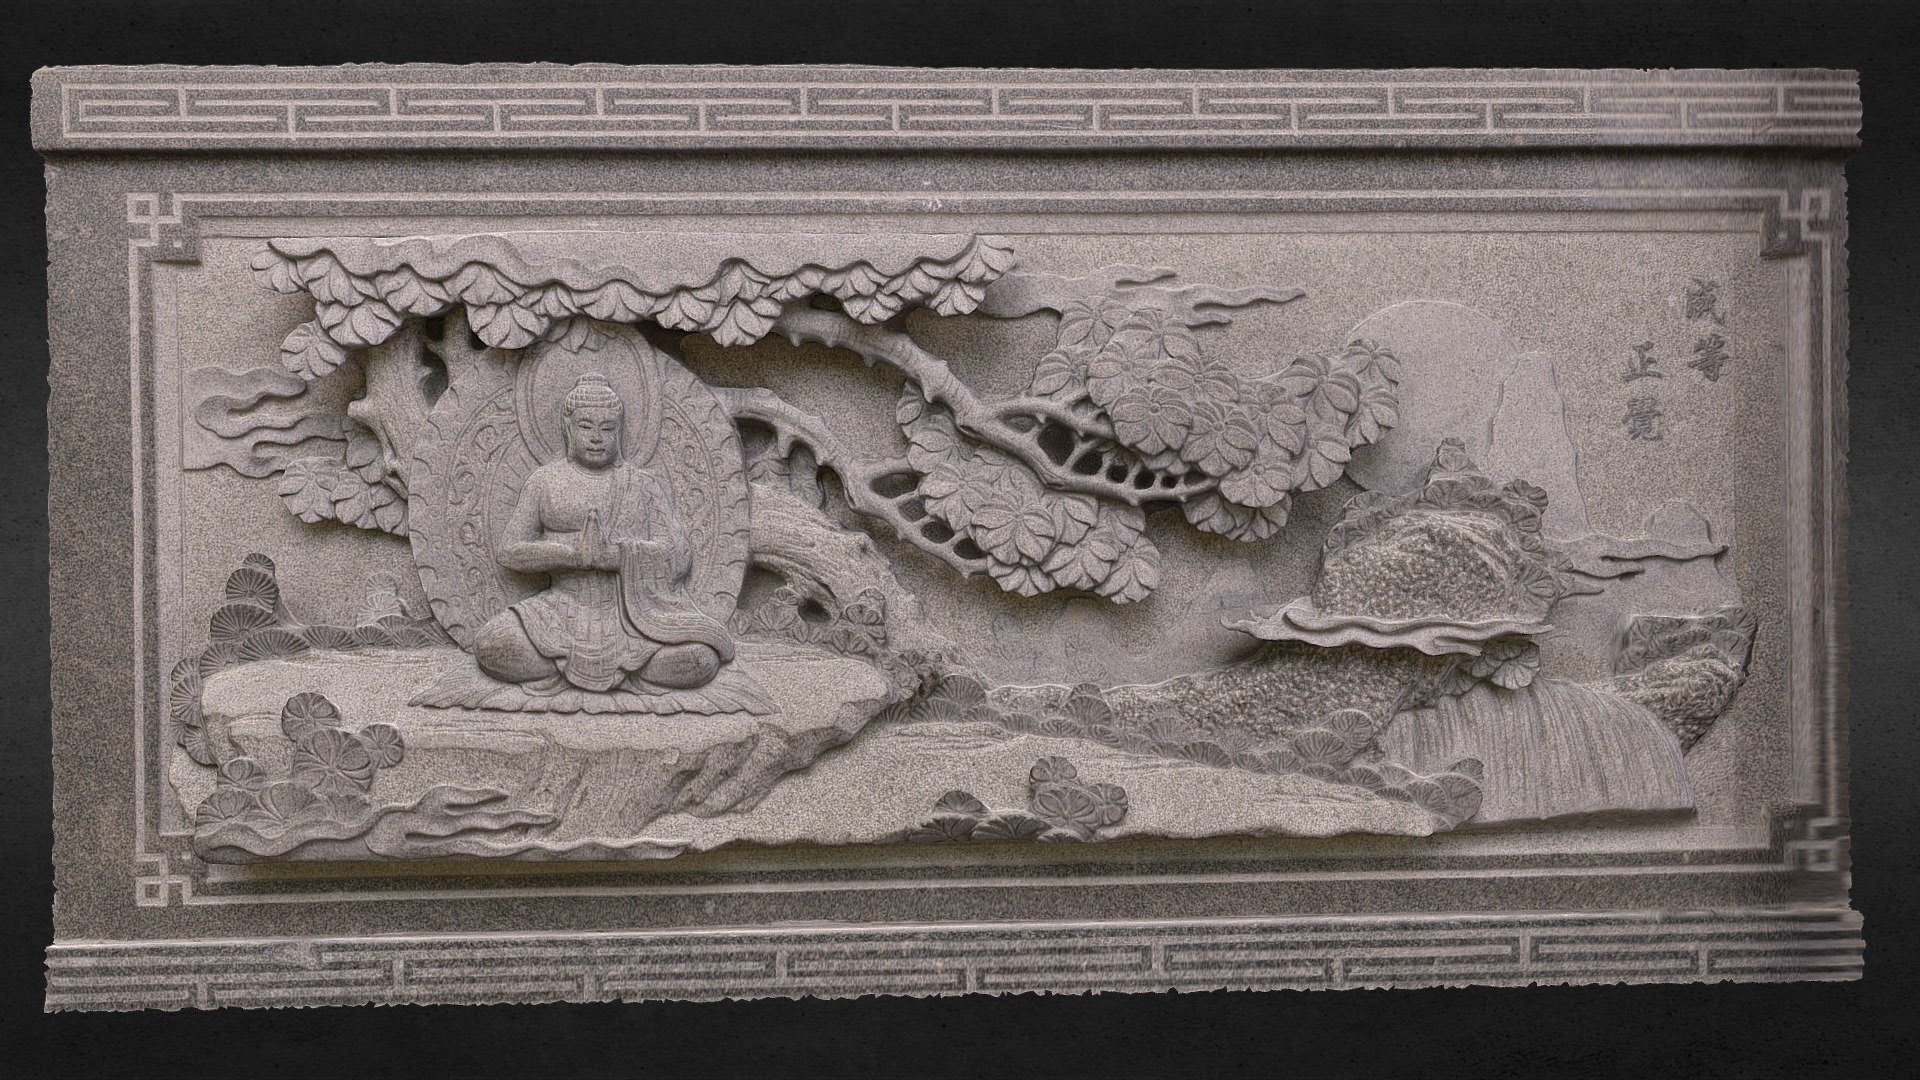 Scan created from 22 photographs taken using a Nikon D5300 with a 18-55mm kit lens.

http://kekloksitemple.com/

[I had errenously listed this one as being made from 15 photographs, when it was infact made from 22. Got mixed up  =S]

Carving is located at the Kek Lok Si Buddhist Temple in Penang, Malaysia.

(photographed in July, 2016) - Carved Granite Panel (Kek Lok Si Temple, Penang) - Download Free 3D model by nate_siddle (@nate_sid) 3d model